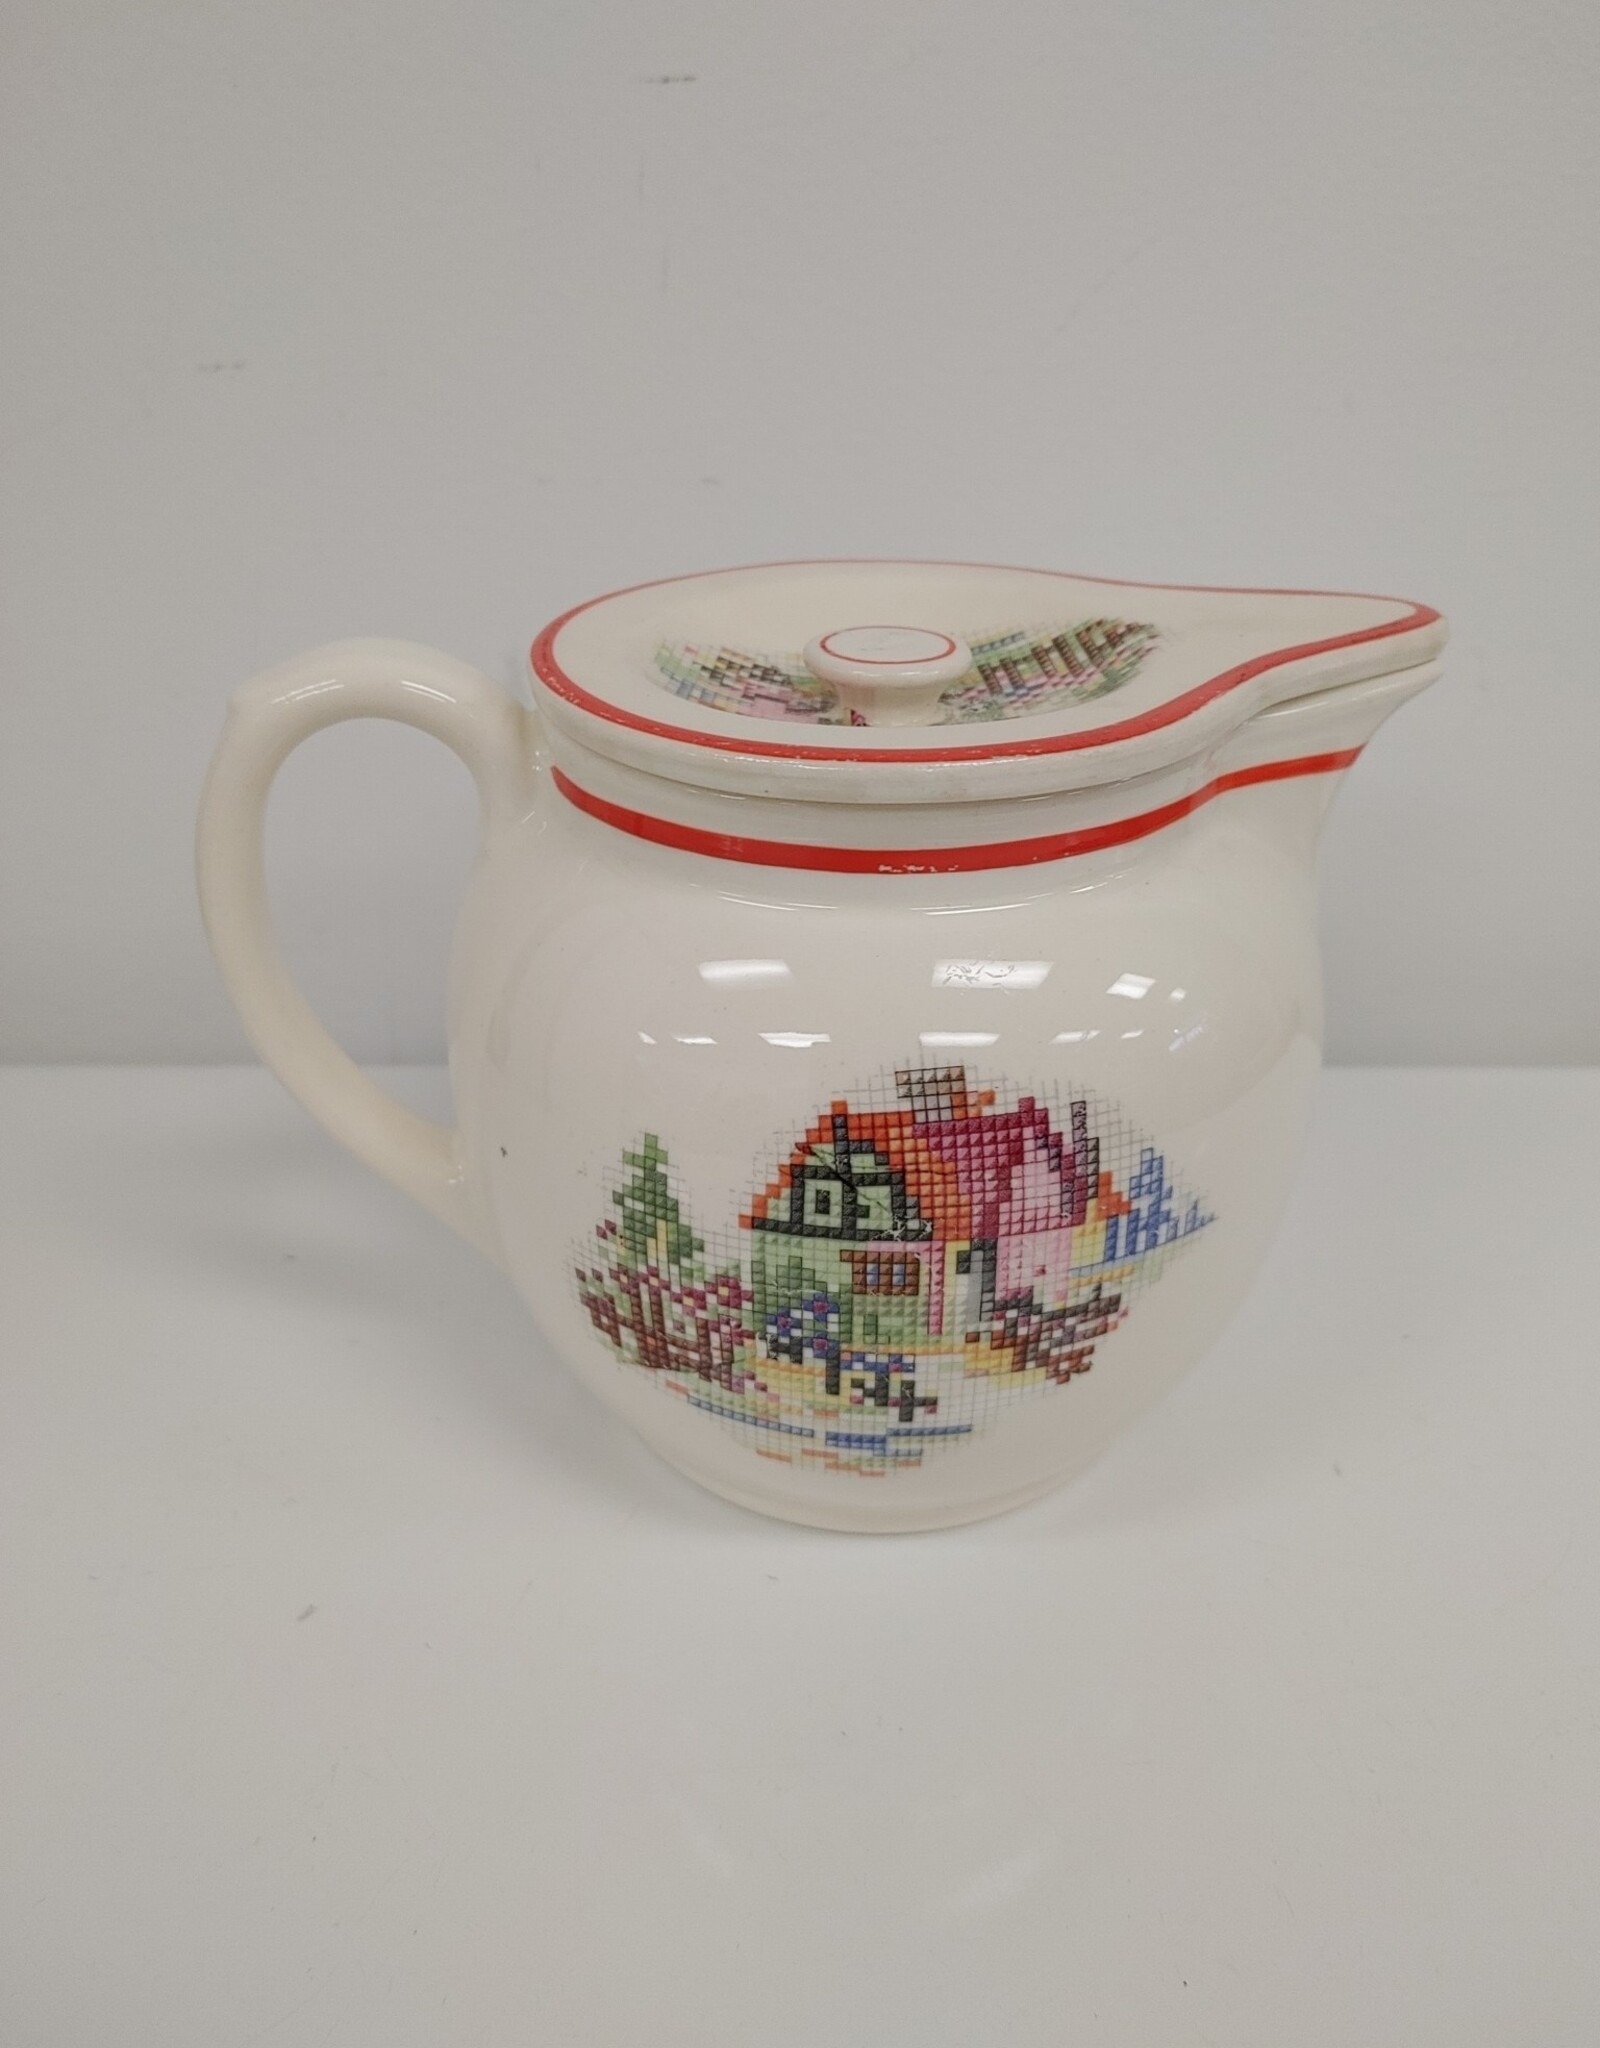 Vintage Pantry Bak-IN by Ware Crooksville USA Pitcher w/lid